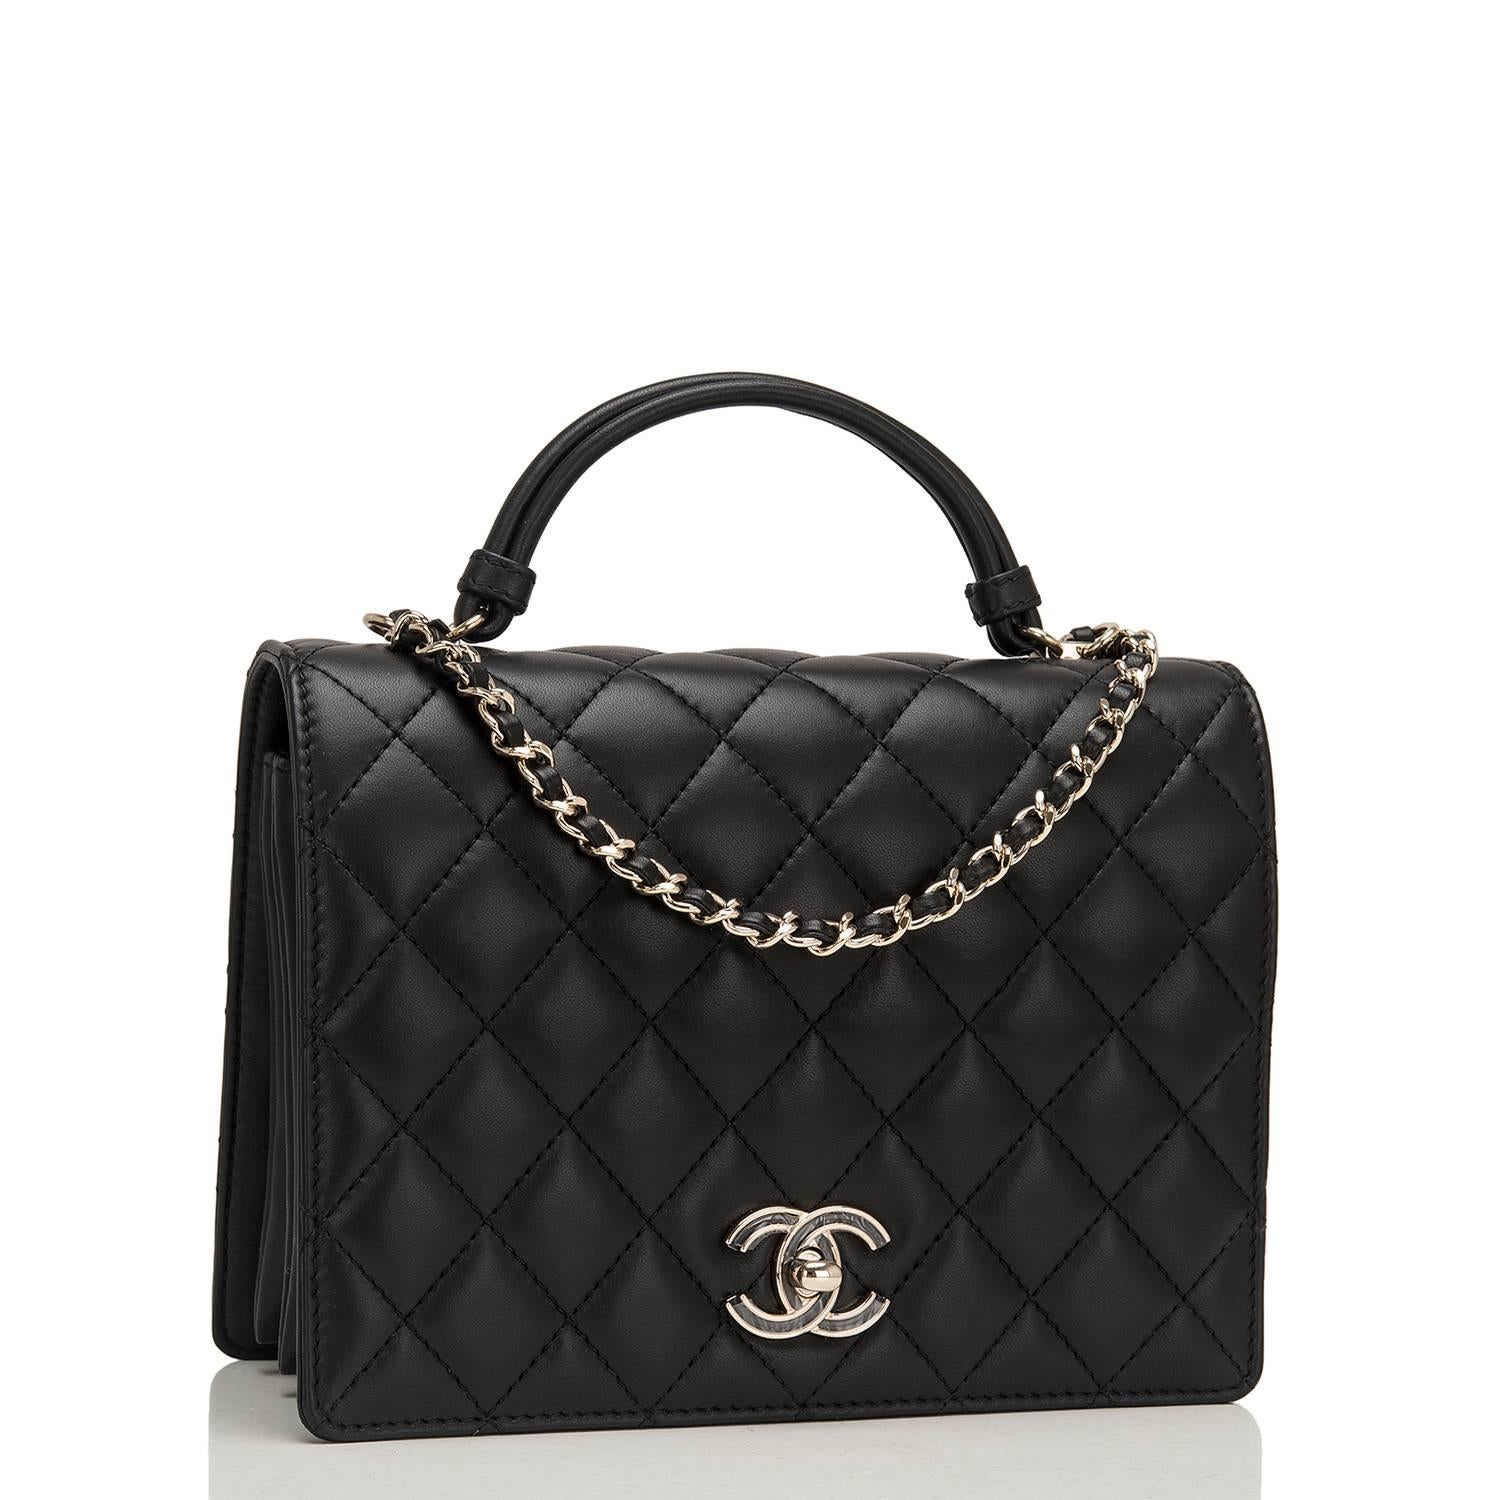 Chanel Handle Tied of black quilted lambskin leather with gold tone hardware.

This bag features a front flap with CC turnlock closure, back pocket, interwoven gold and black leather chain with shoulder pad and a single 